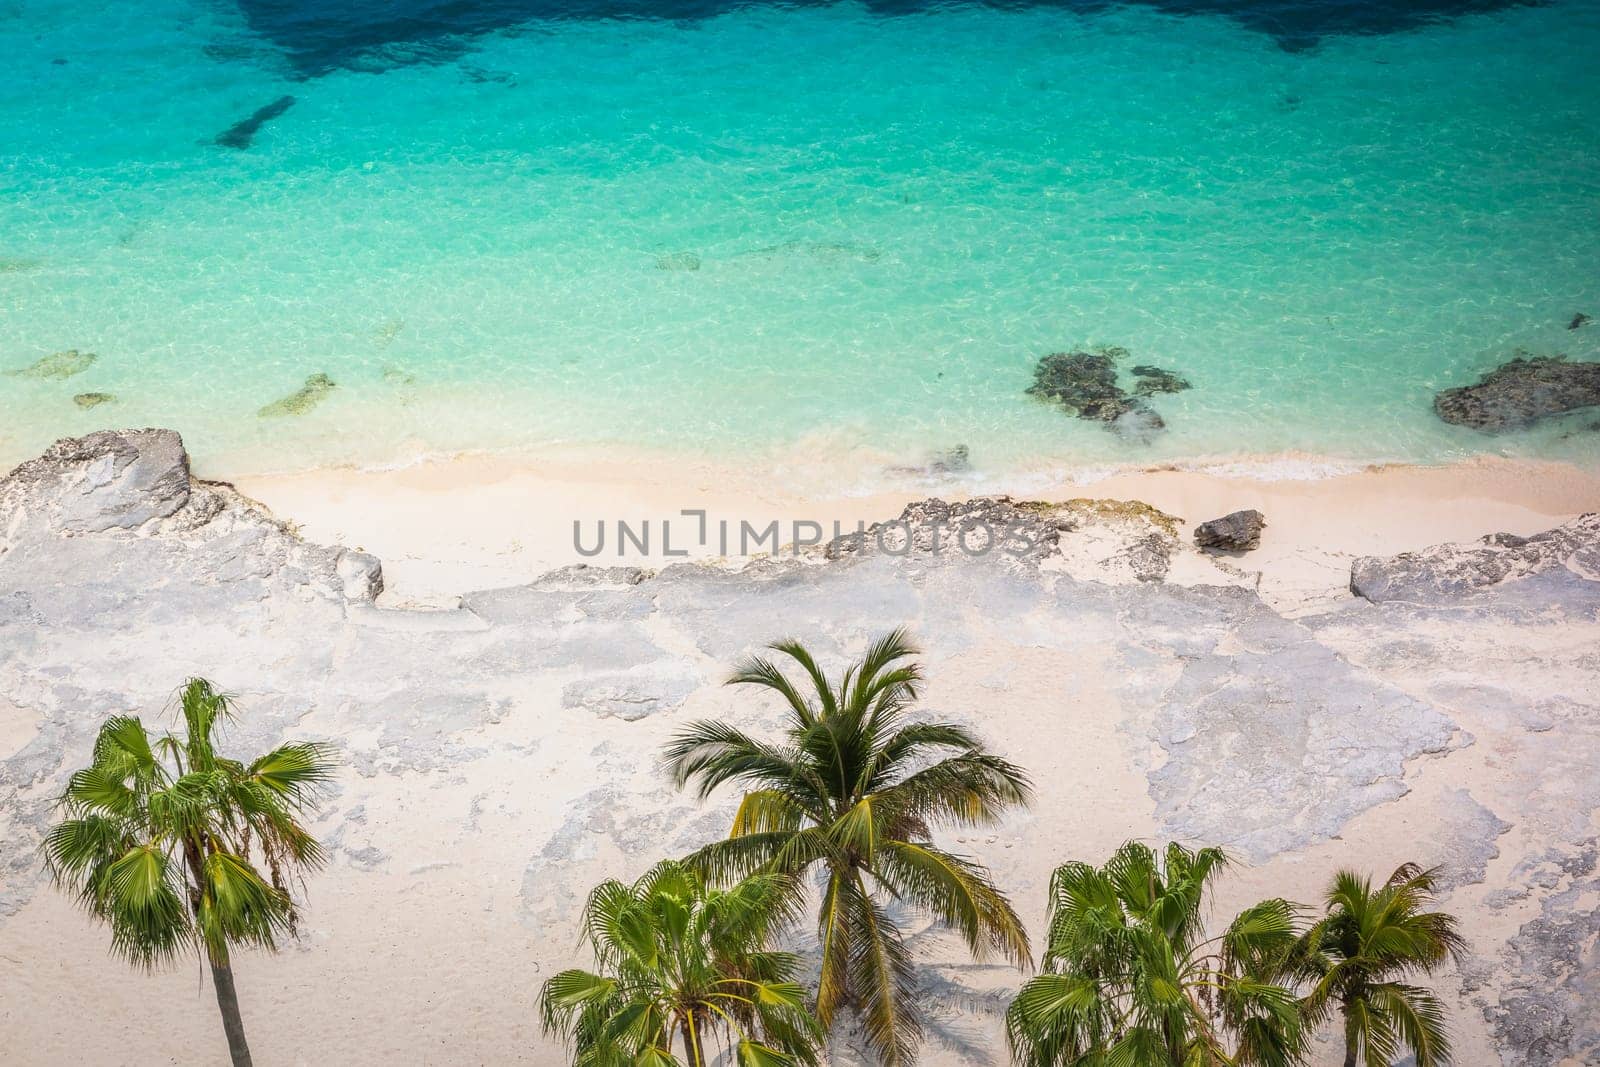 Cancun beach with palm trees from above at sunset, Riviera Maya, Mexican Caribbean